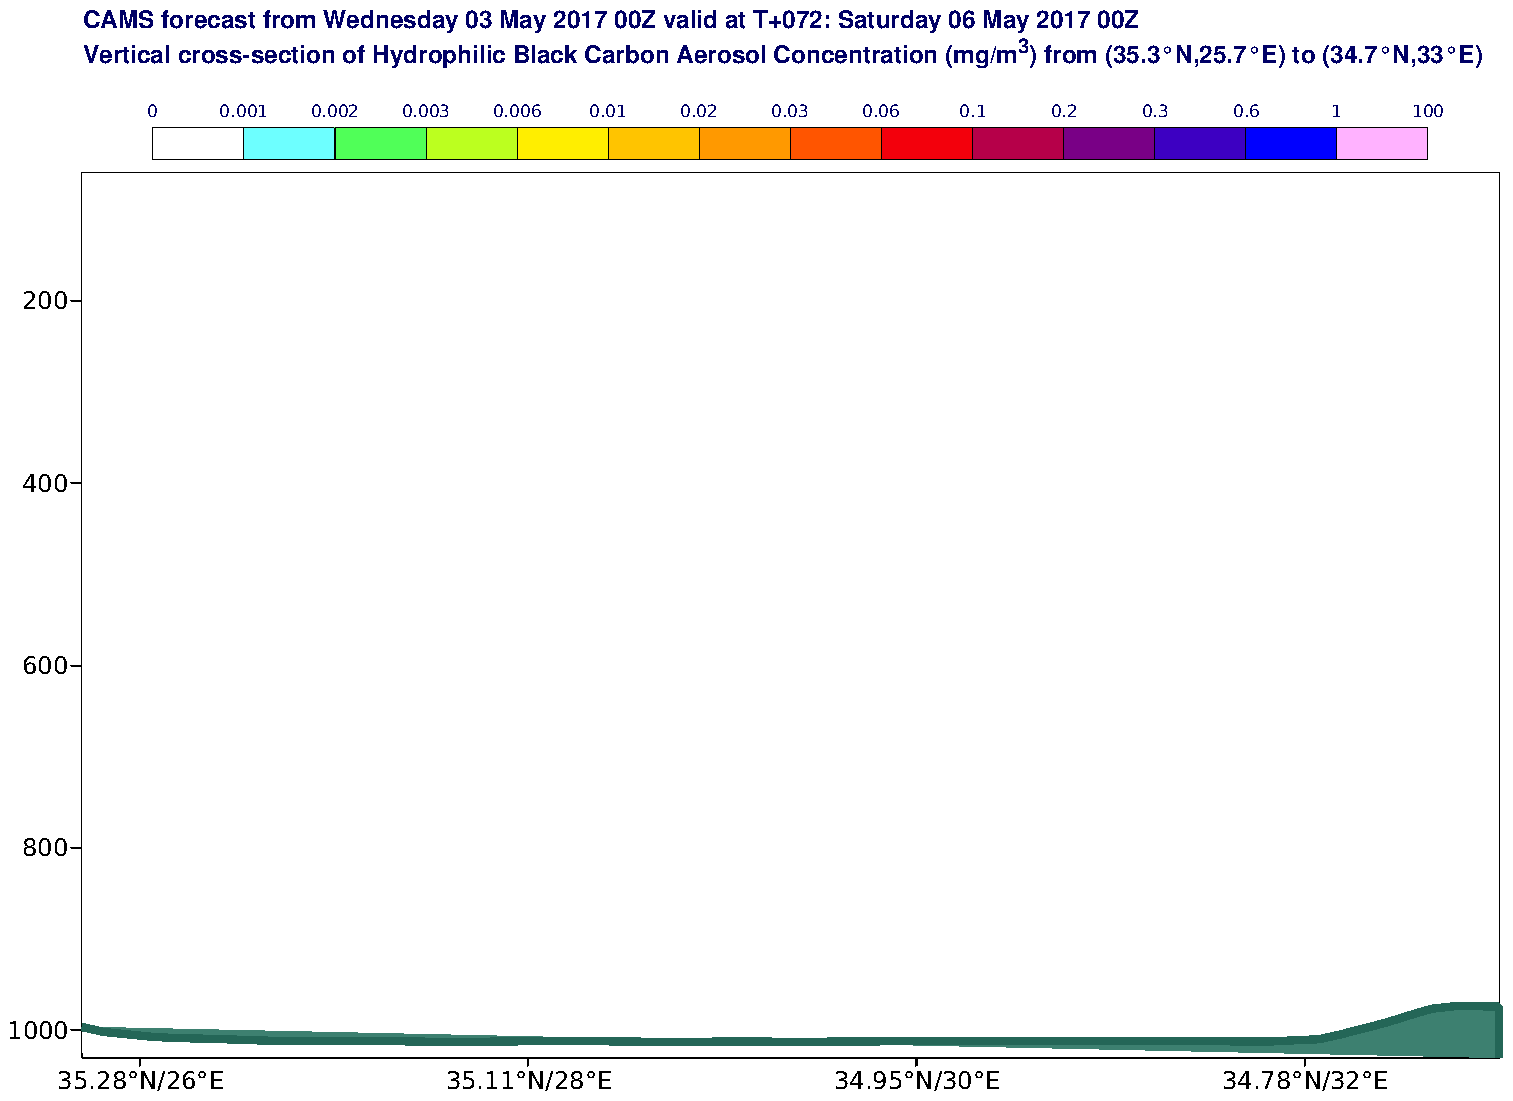 Vertical cross-section of Hydrophilic Black Carbon Aerosol Concentration (mg/m3) valid at T72 - 2017-05-06 00:00